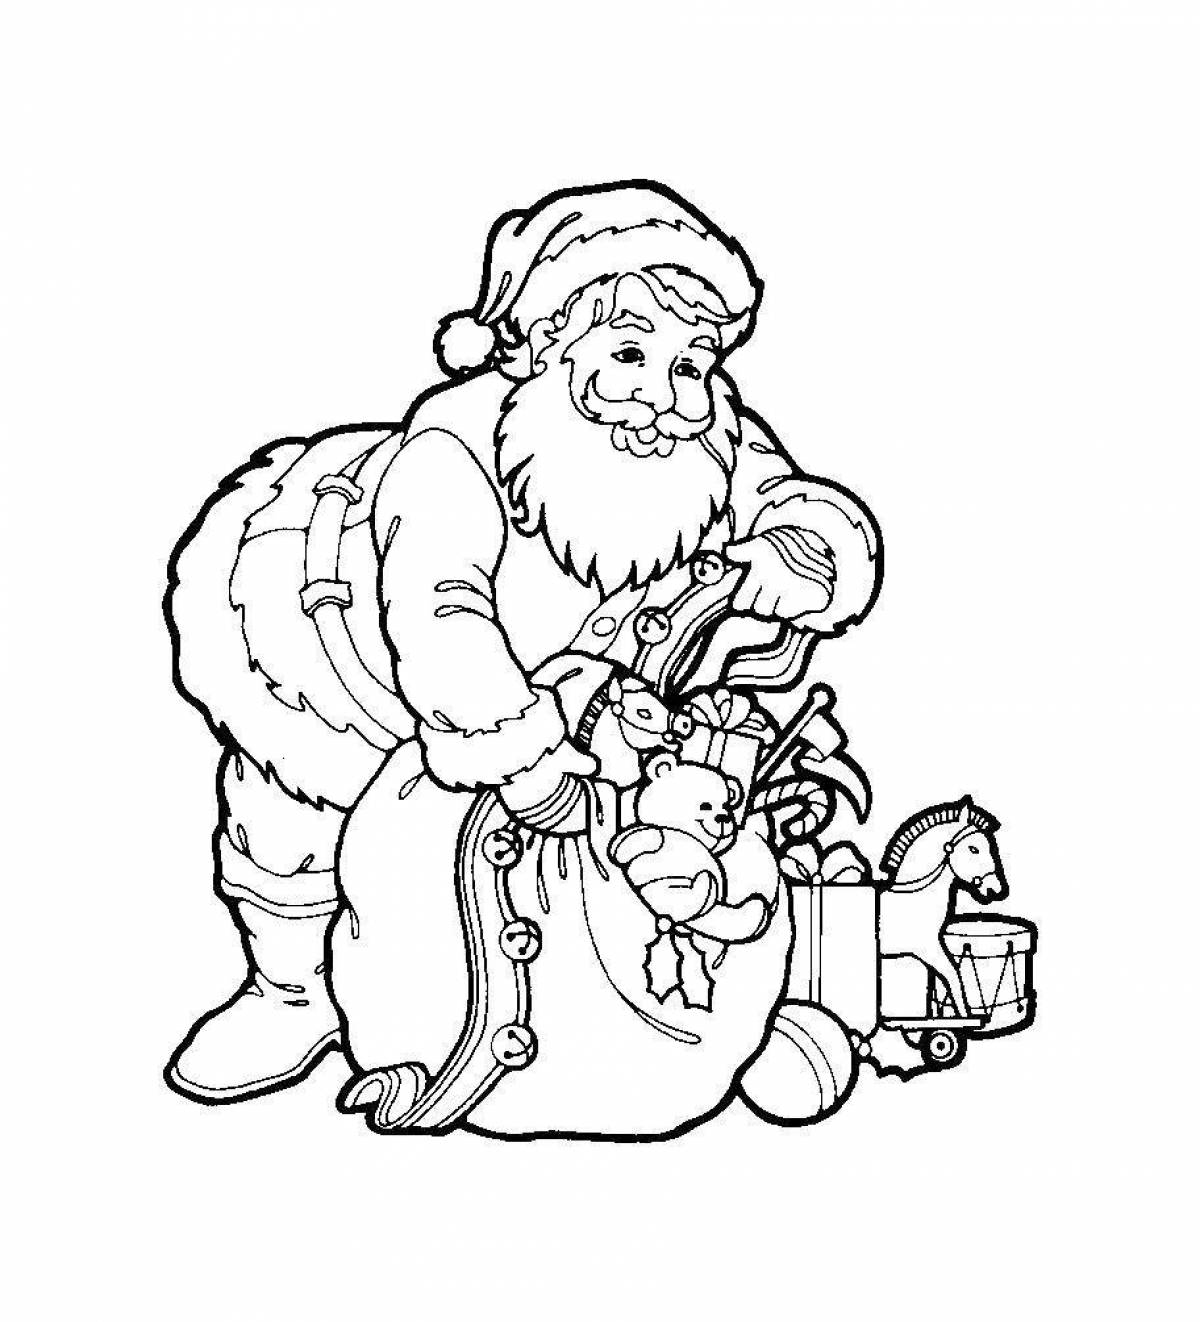 Coloring page good grandfather